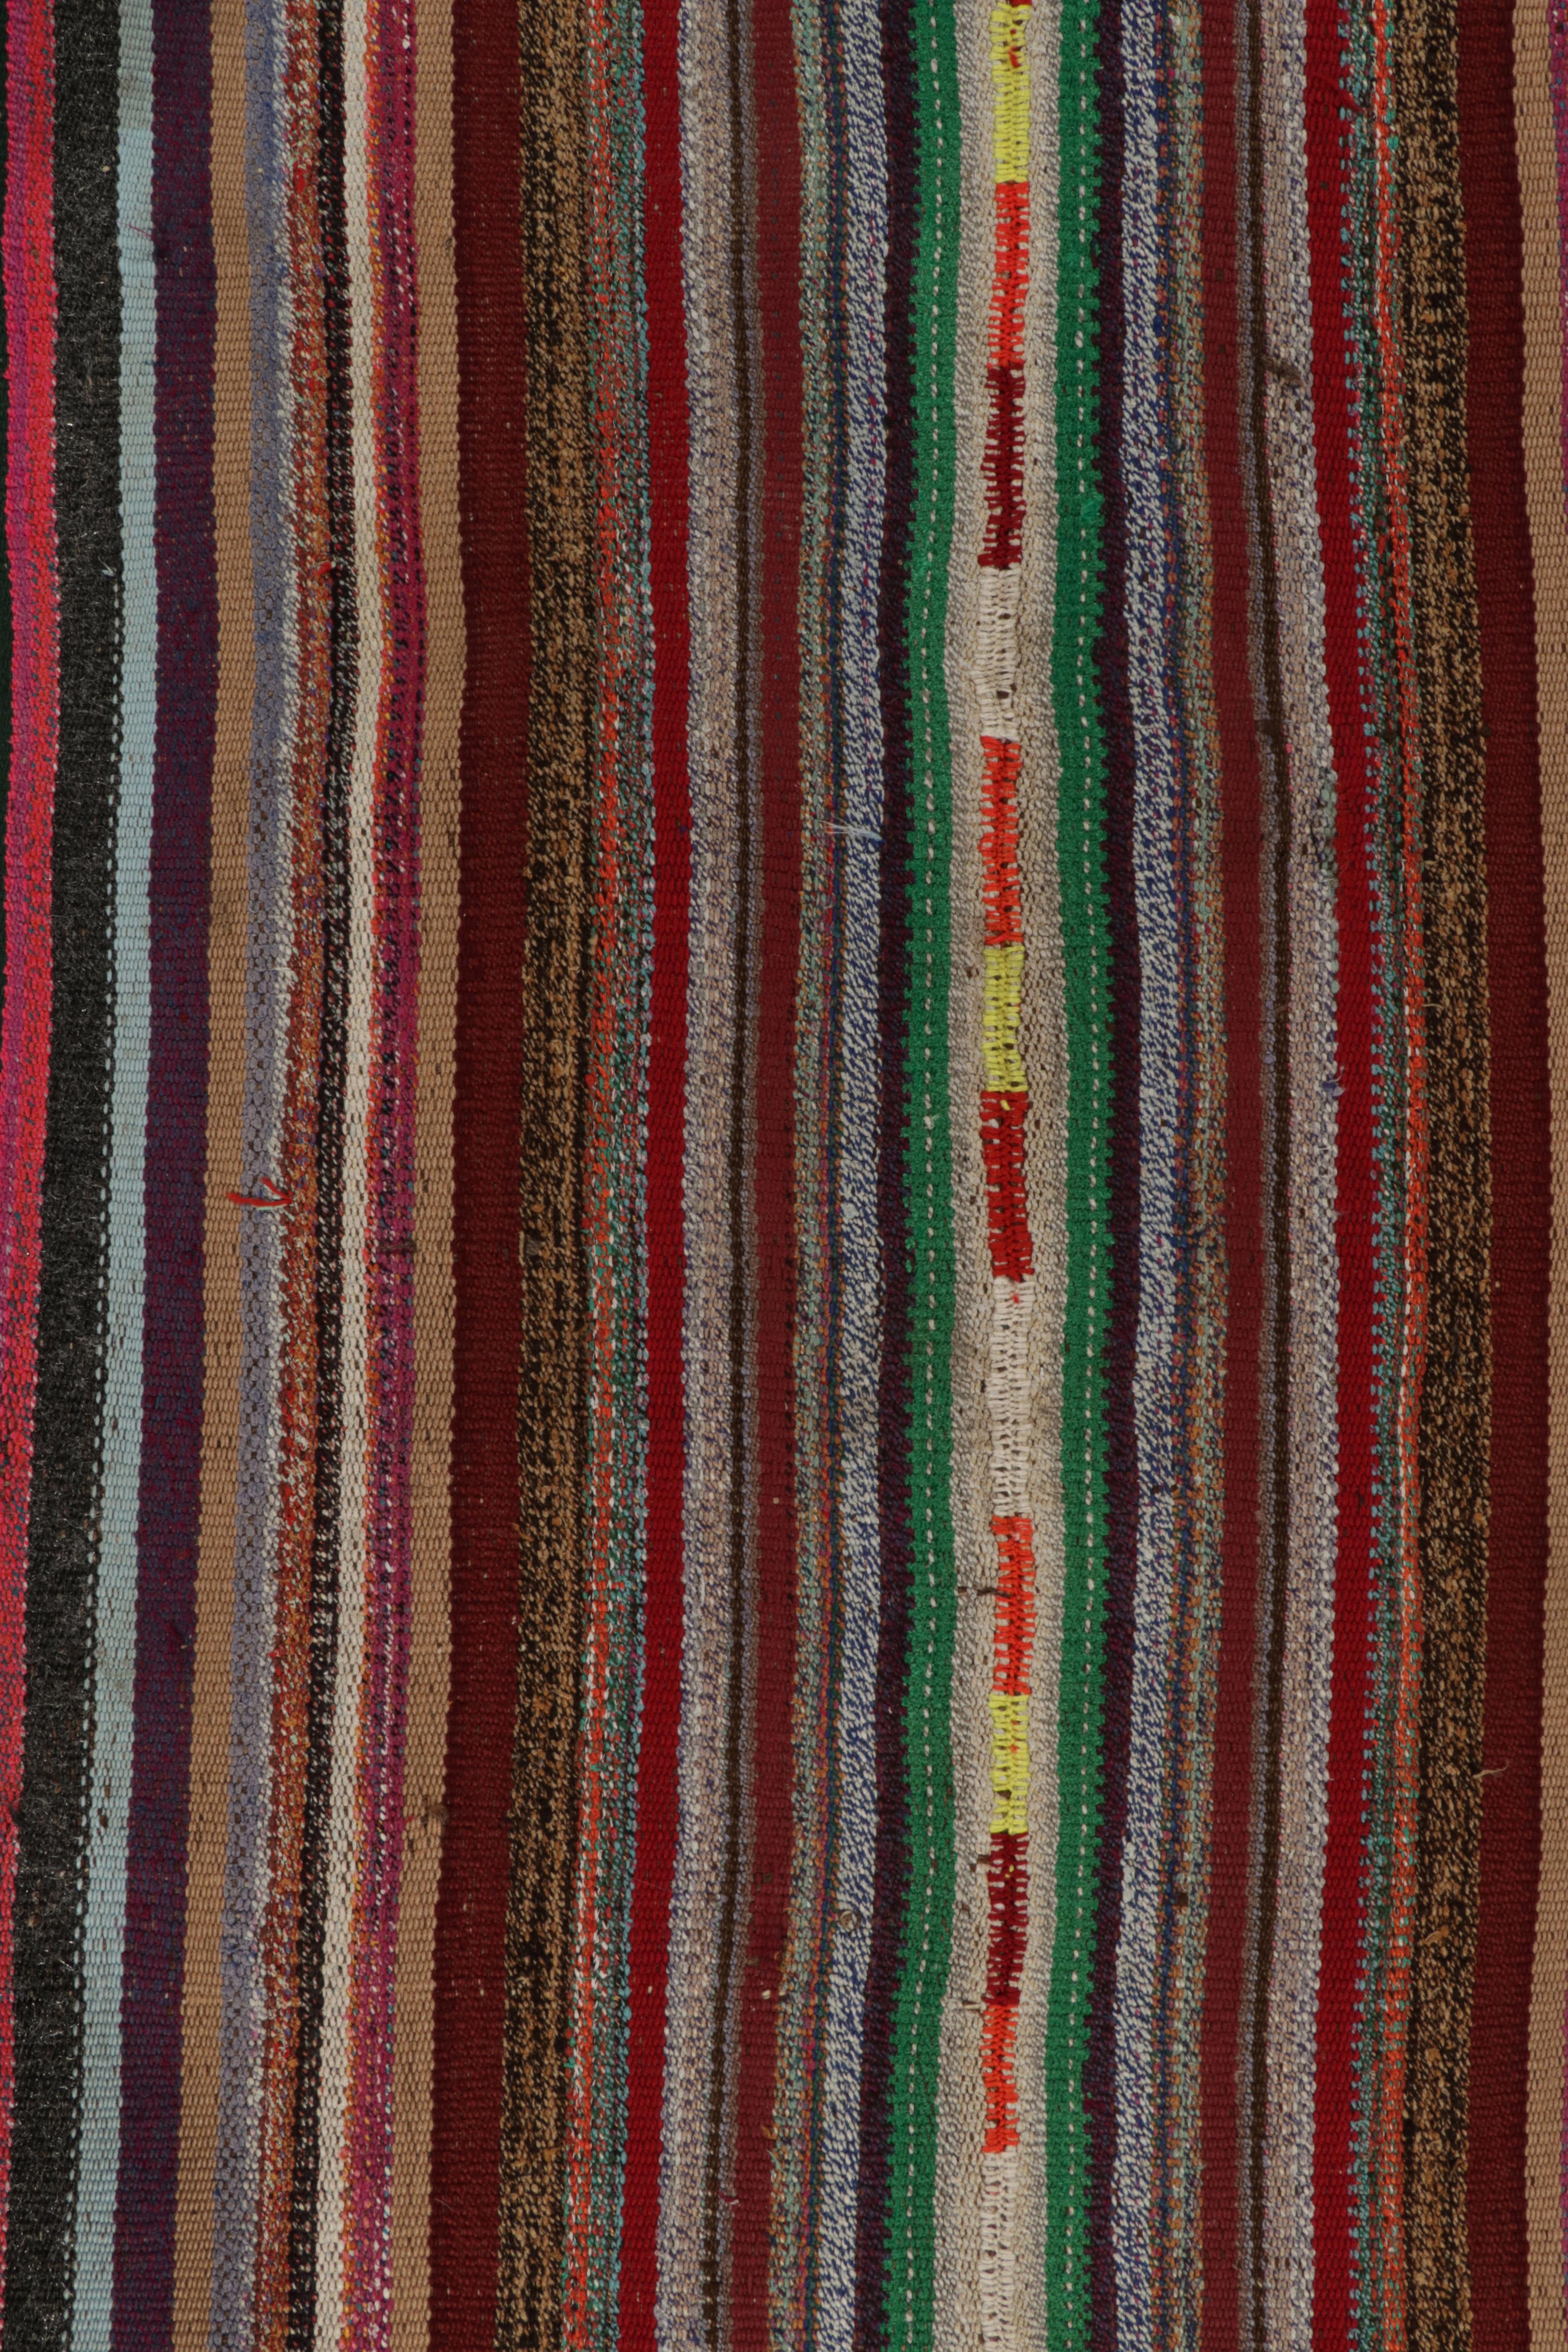 Hand-Knotted 1950s Vintage Chaput Kilim in Multicolor Stripe Patterns by Rug & Kilim For Sale